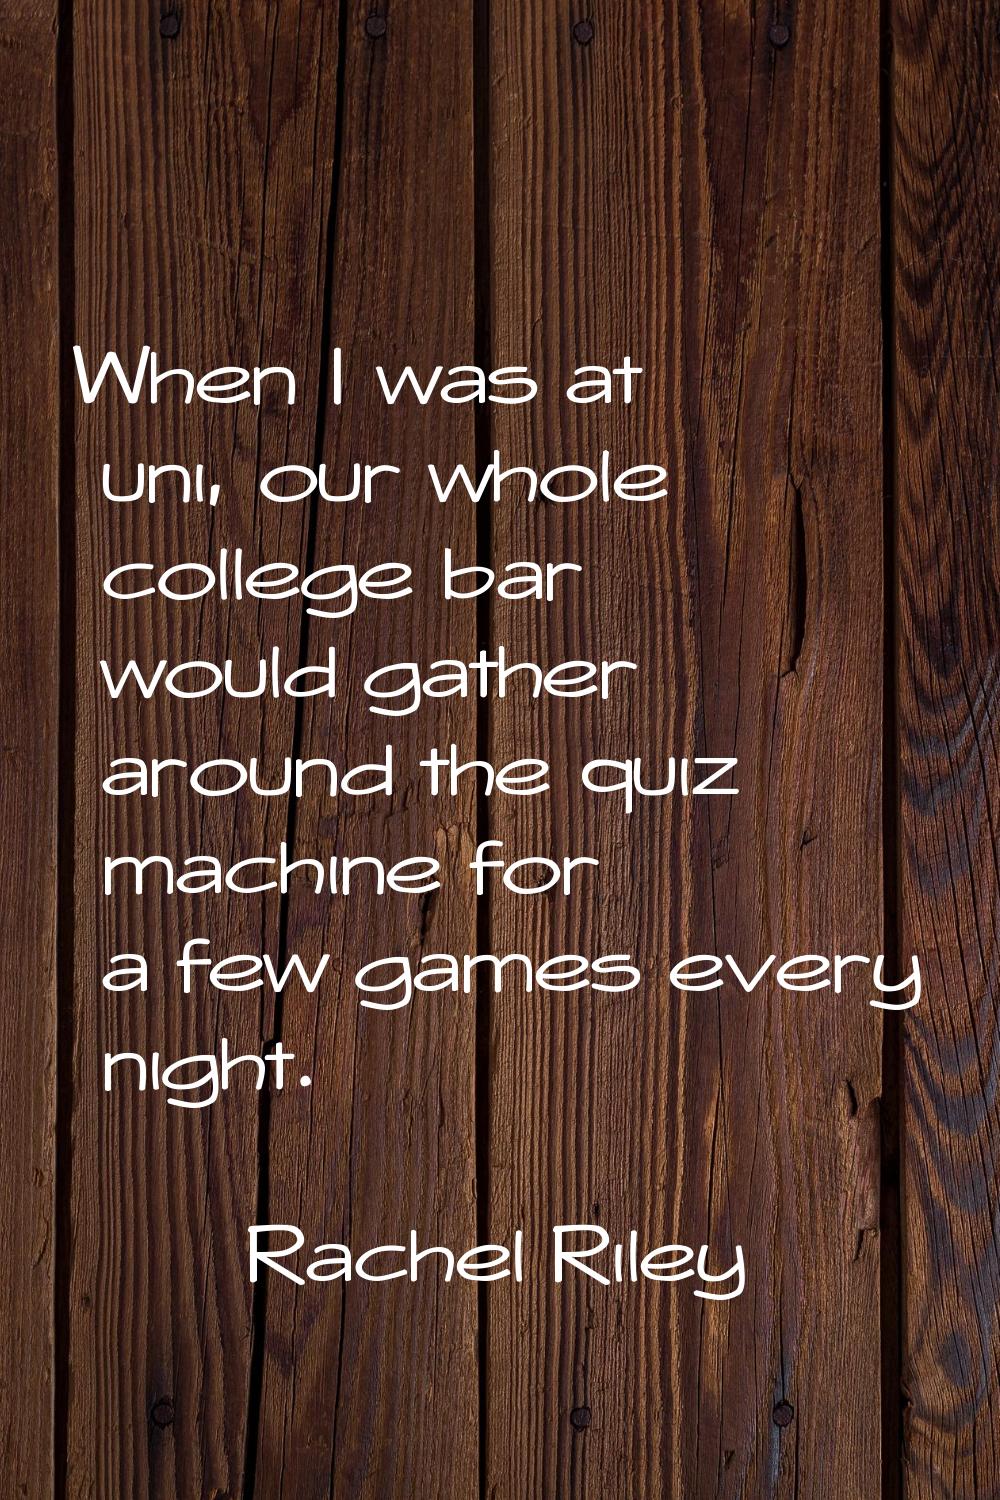 When I was at uni, our whole college bar would gather around the quiz machine for a few games every